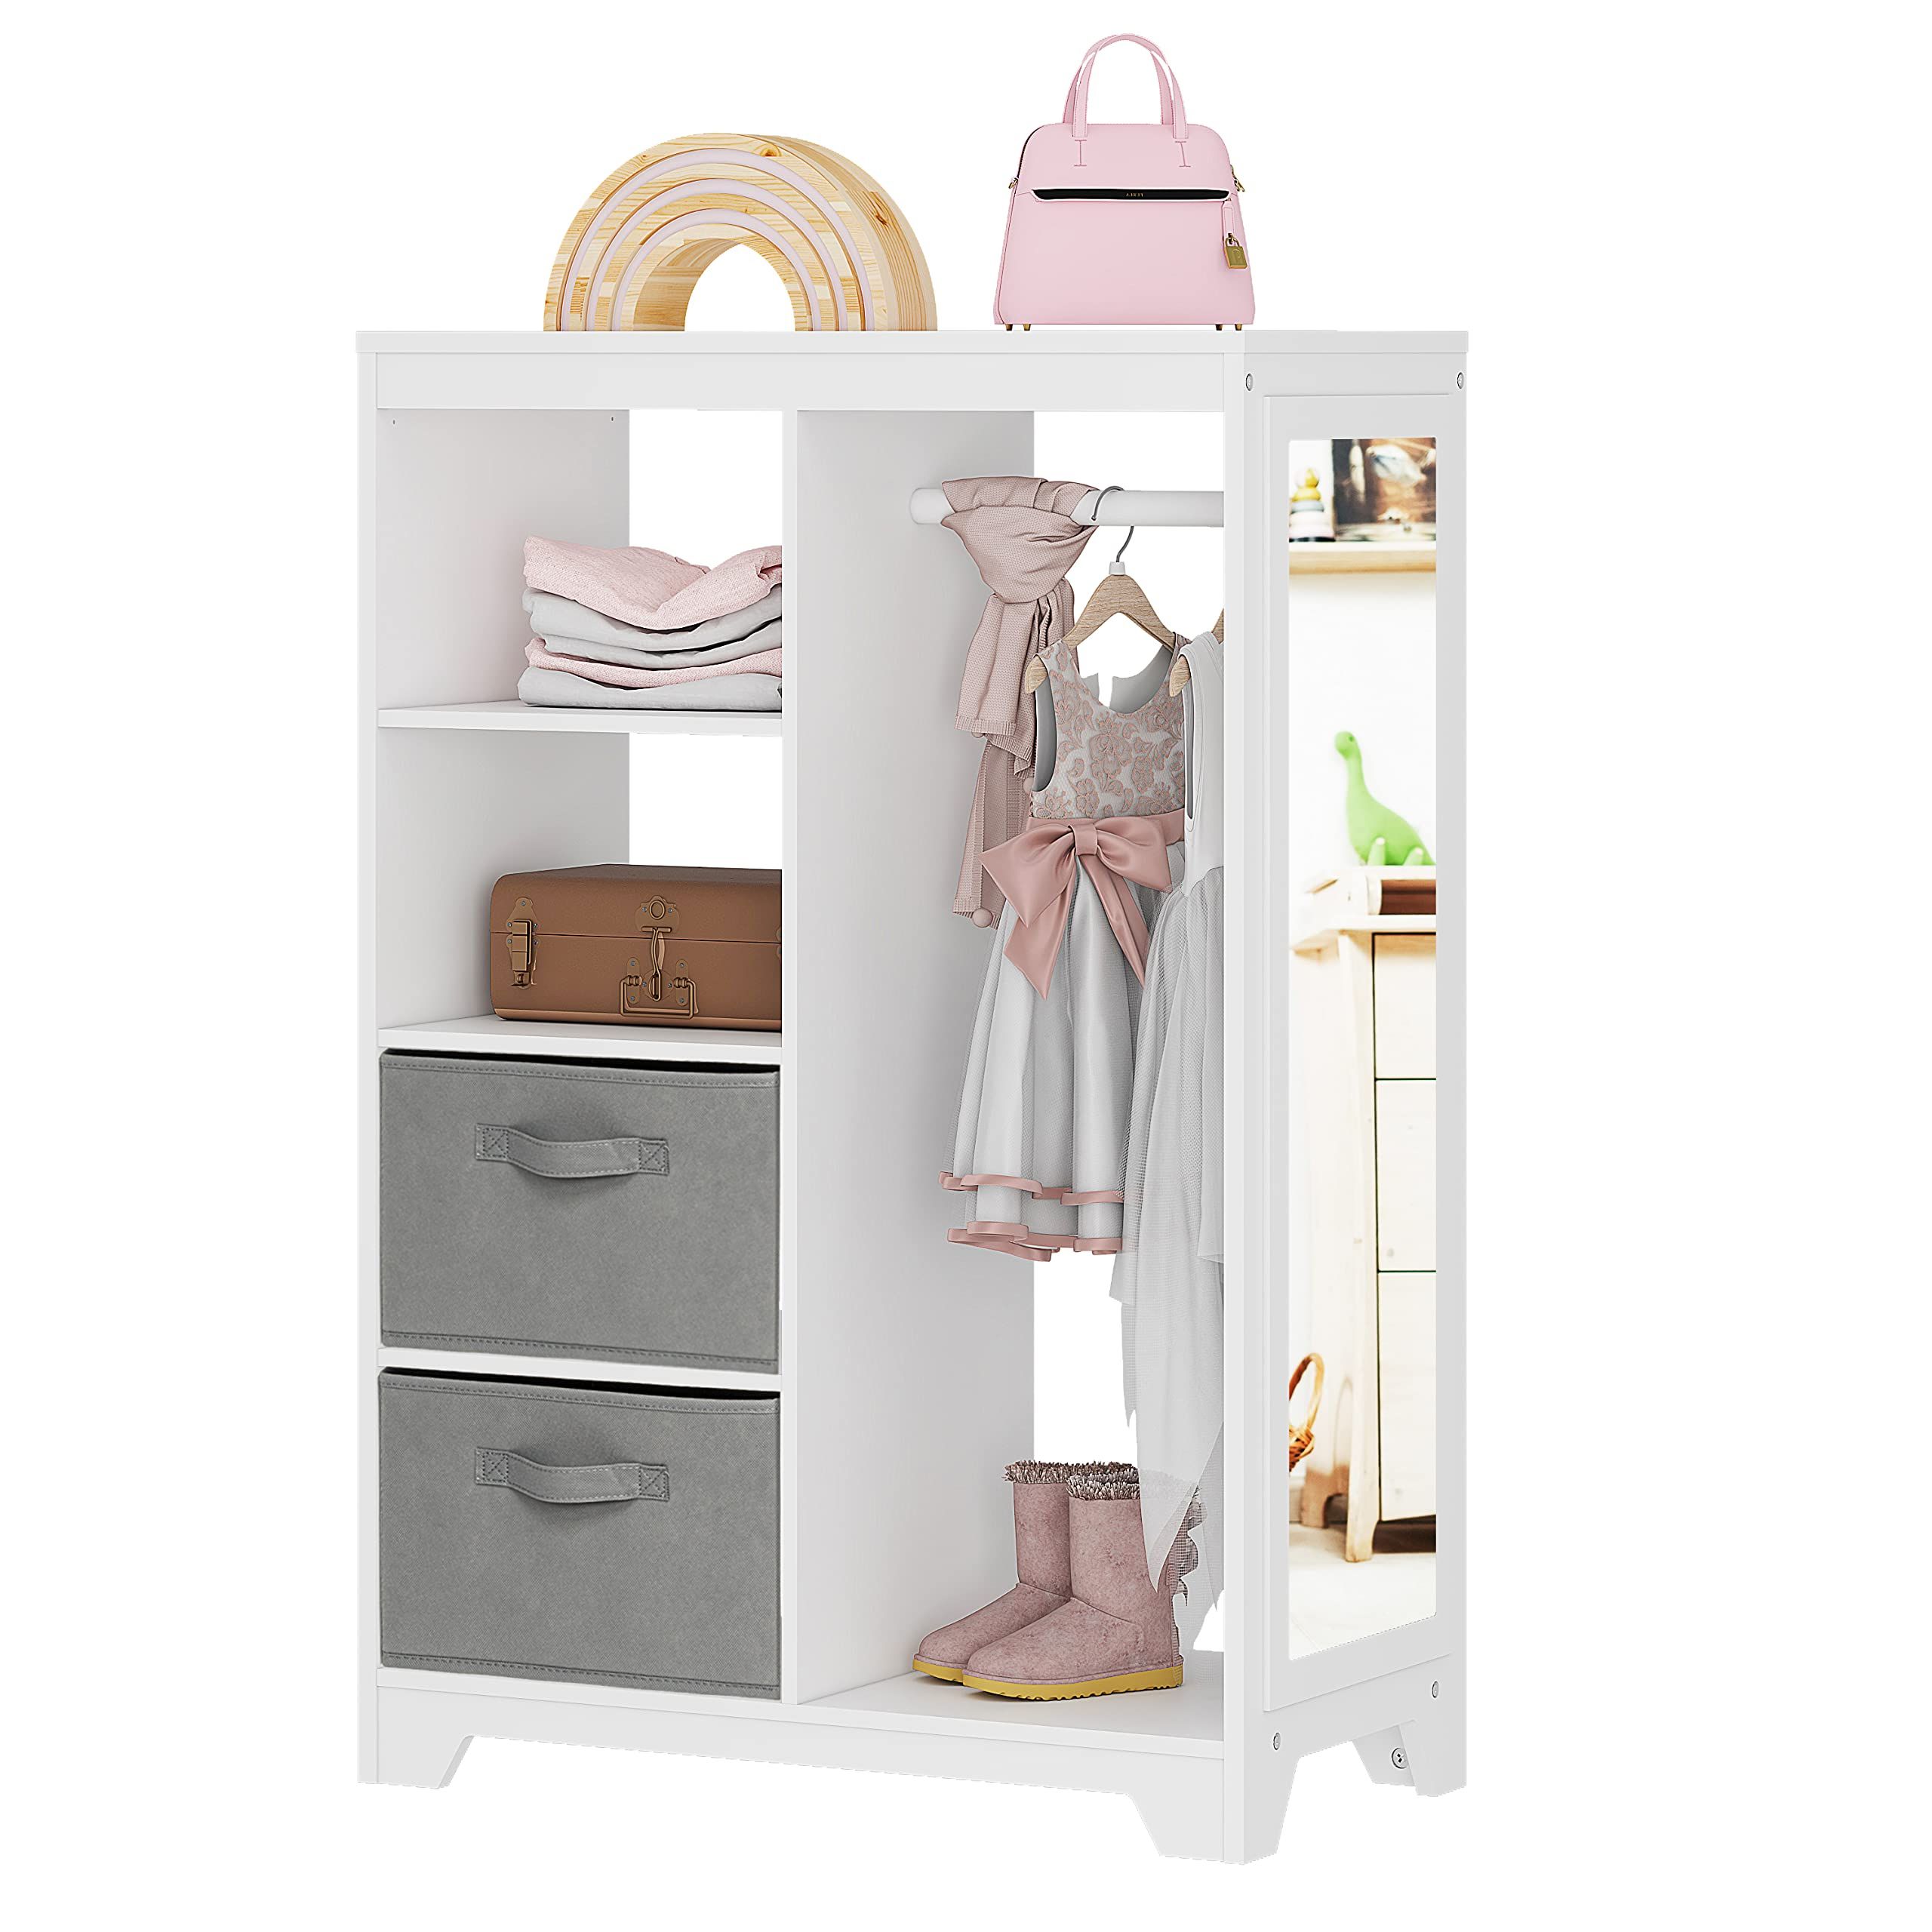 Amazon: Utex Kids Dress Up Storage With Mirror, Kids Armoire Dresser  With 2 Storage Bins And Open Hanging, Costume Closet Wardrobe For Kids,  Pretend Storage Closet Armoire Dresser For Bedroom, Kids Room : Within Famous Wardrobes With 2 Bins (View 2 of 10)